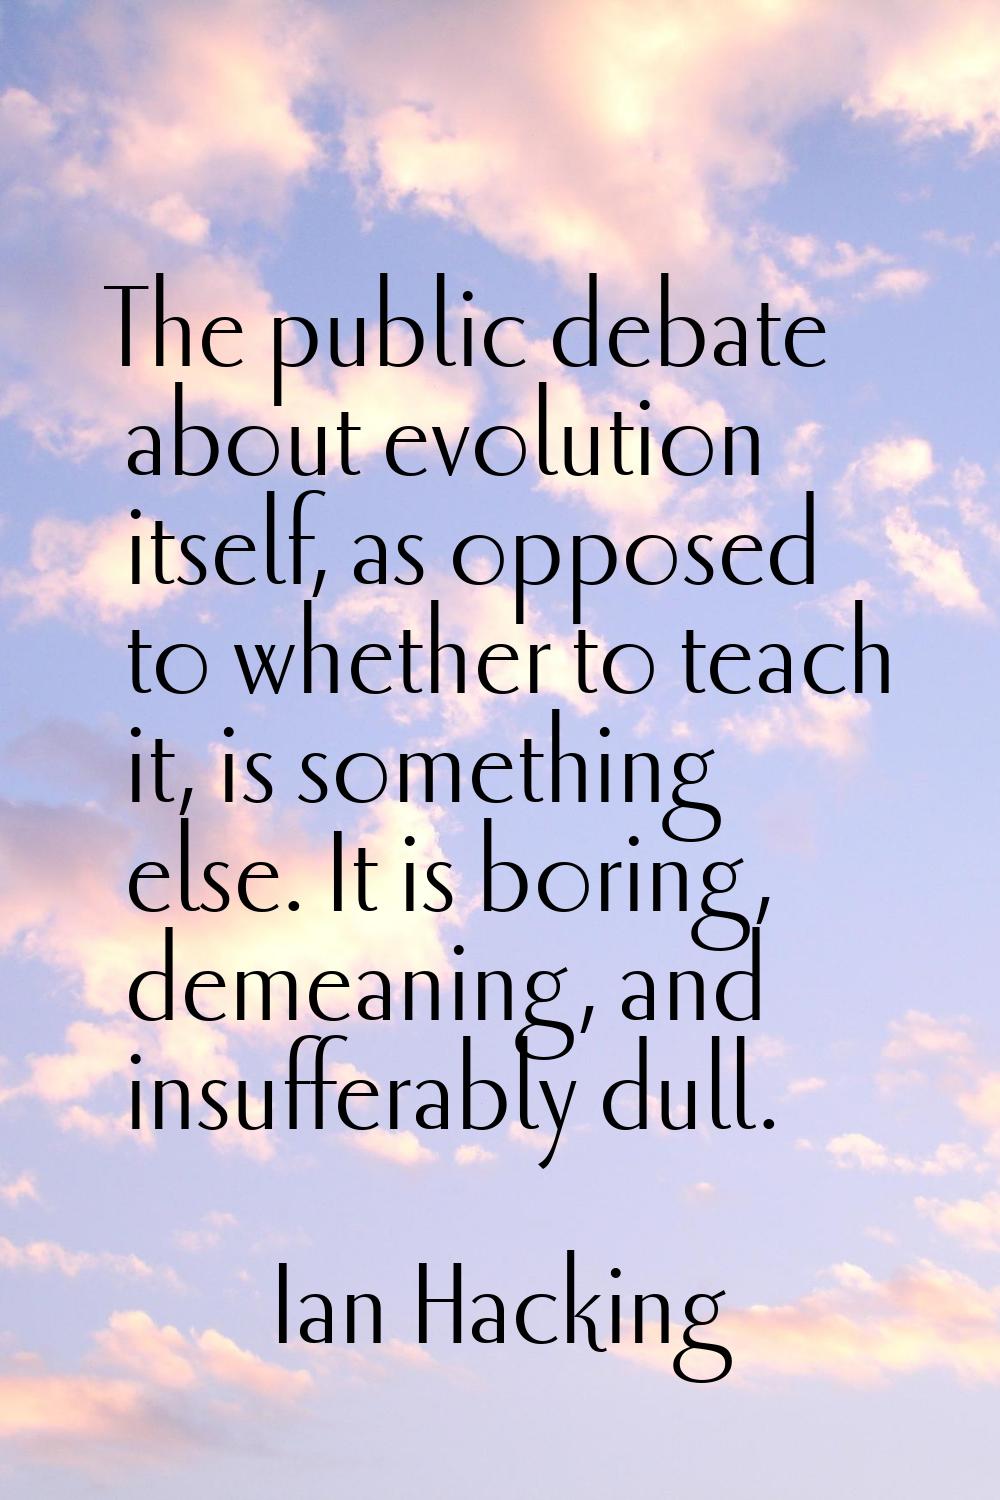 The public debate about evolution itself, as opposed to whether to teach it, is something else. It 